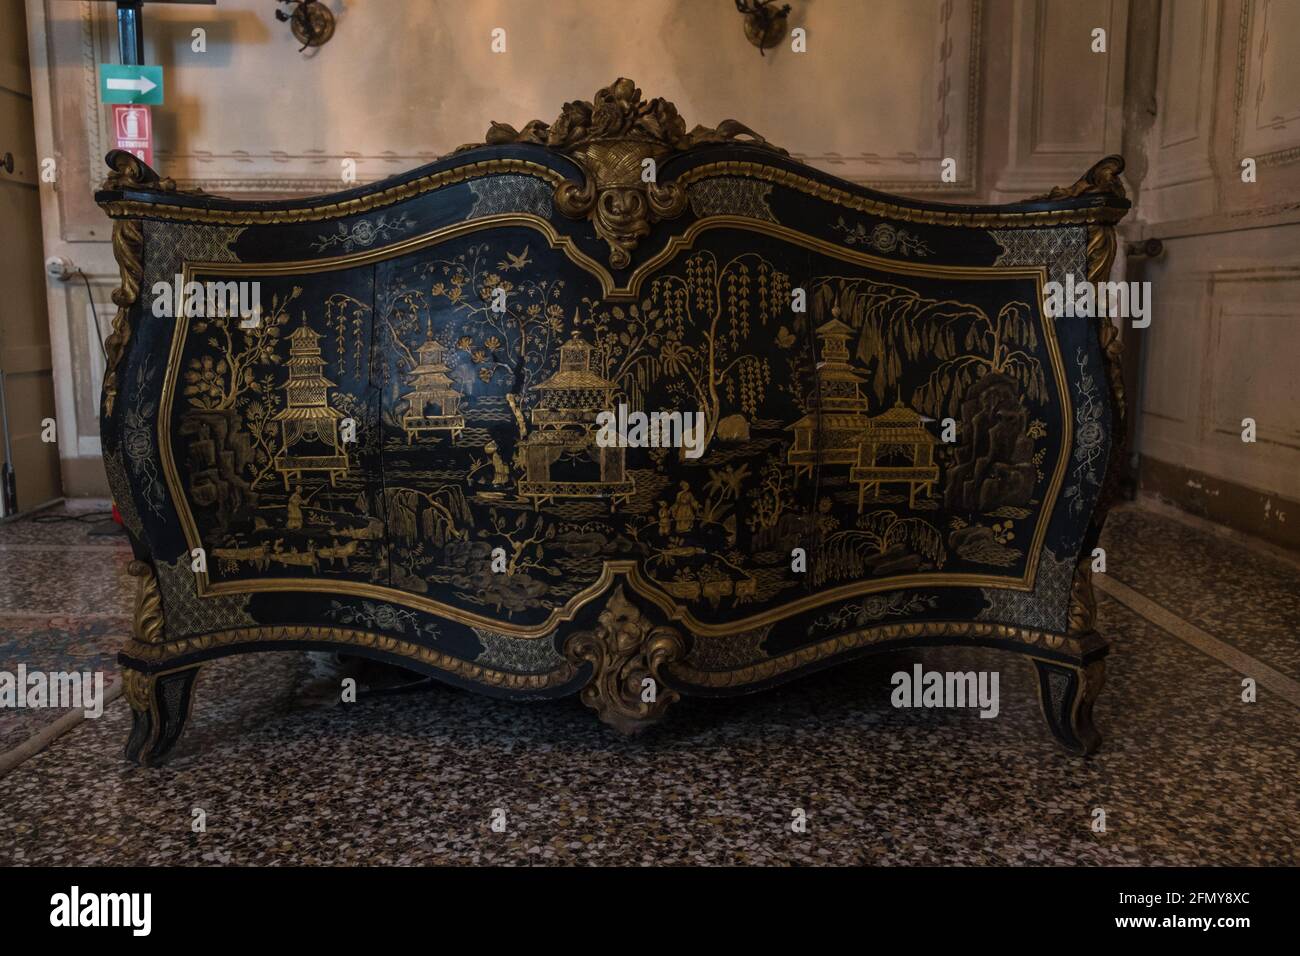 Decorated bed in a room in Villa Durazzo, where Queen Margherita once stayed. This 'palazzo' is now a museum in Santa Margherita Ligure. Stock Photo